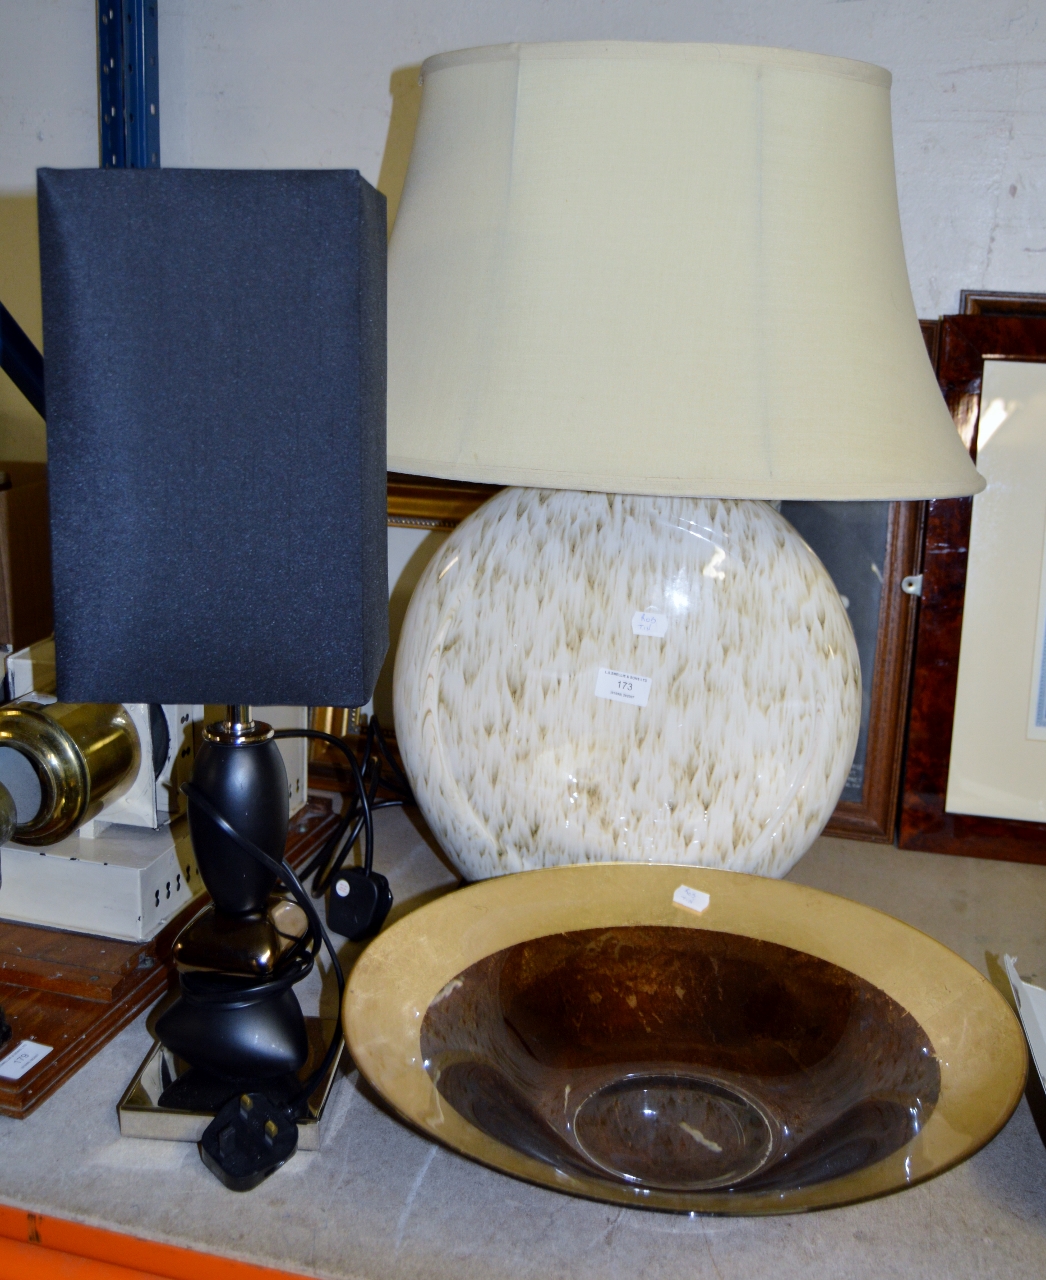 2 TABLE LAMPS & LARGE BOWL